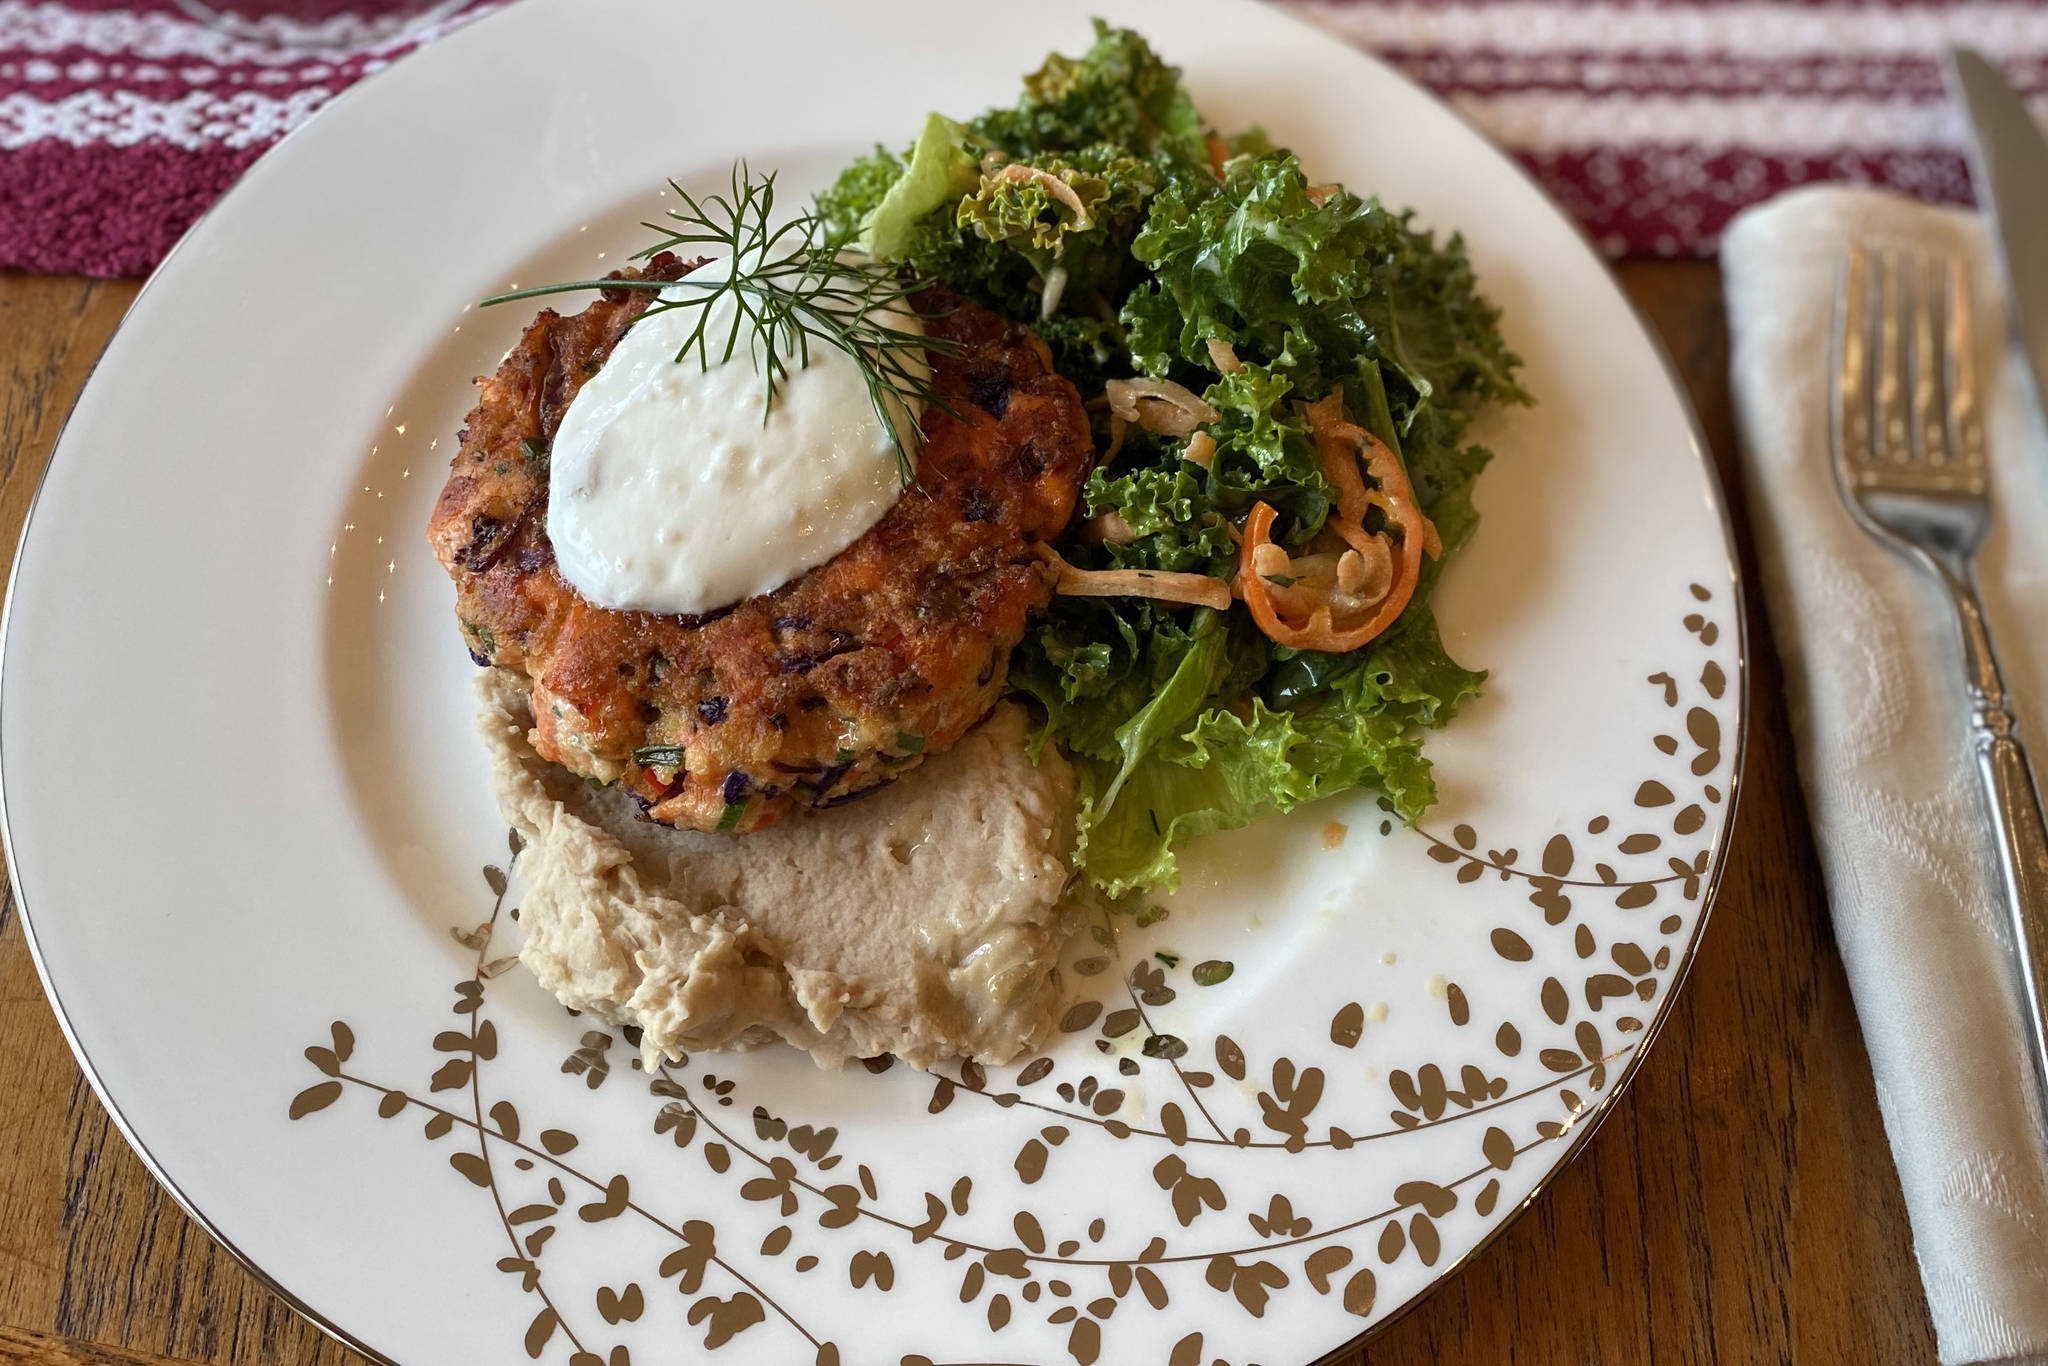 Bell pepper, cabbage and onions add flavor and texture to this salmon cake recipe. (Photo by Tress Dale/Peninsula Clarion)